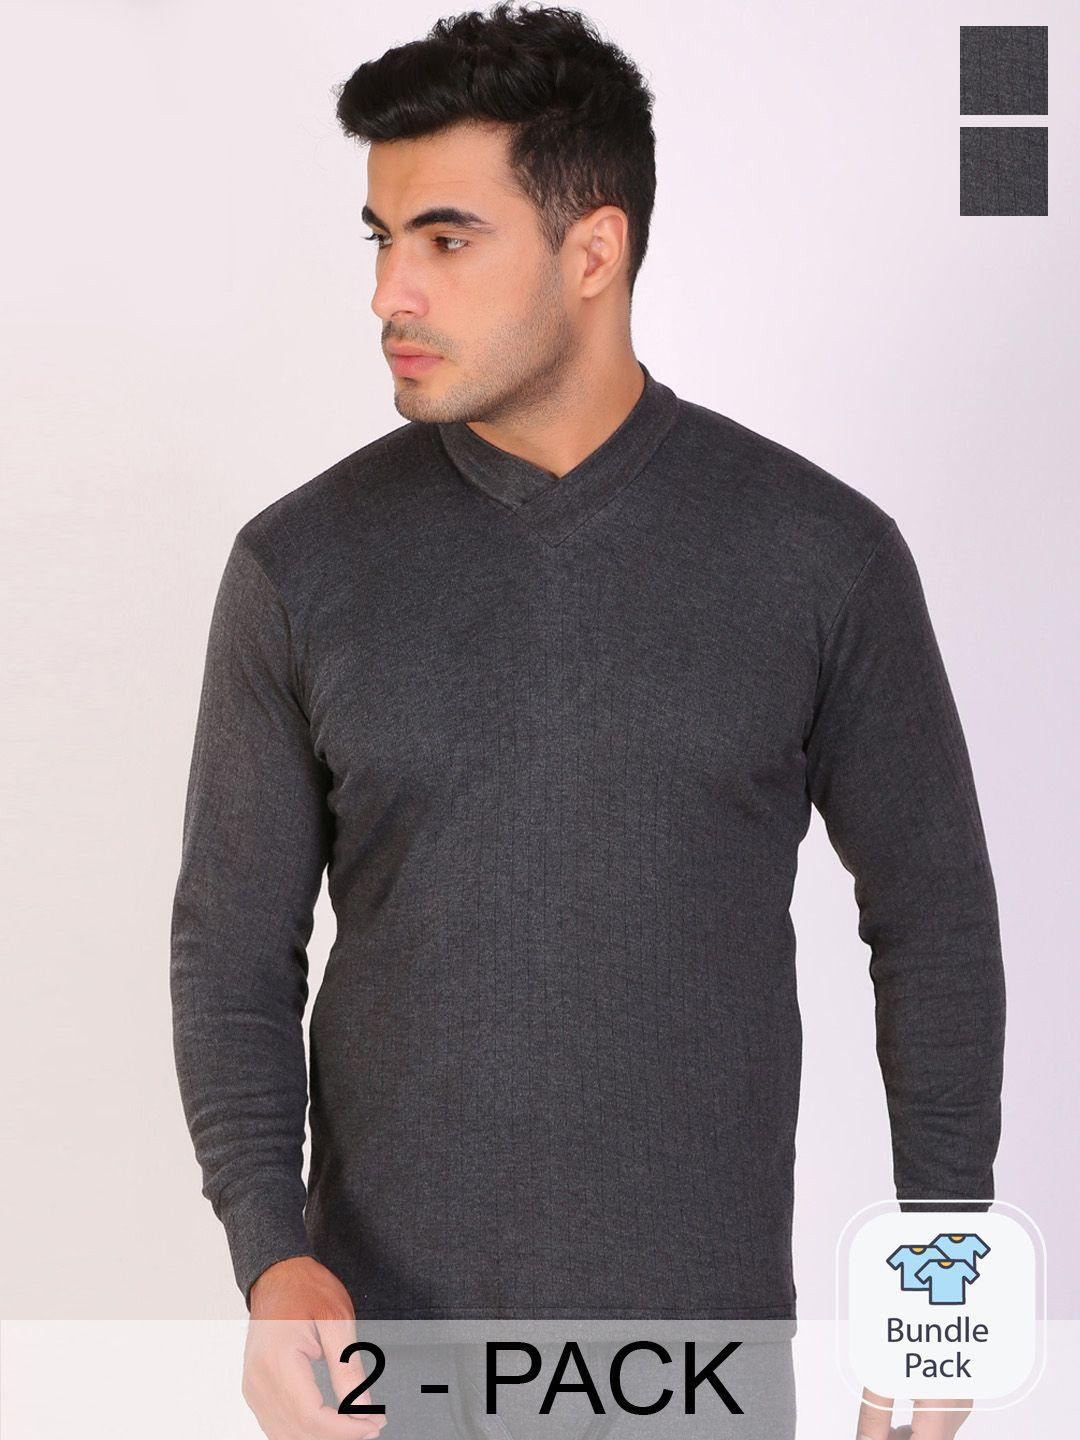 t.t. pack of 2 v-neck thermal top